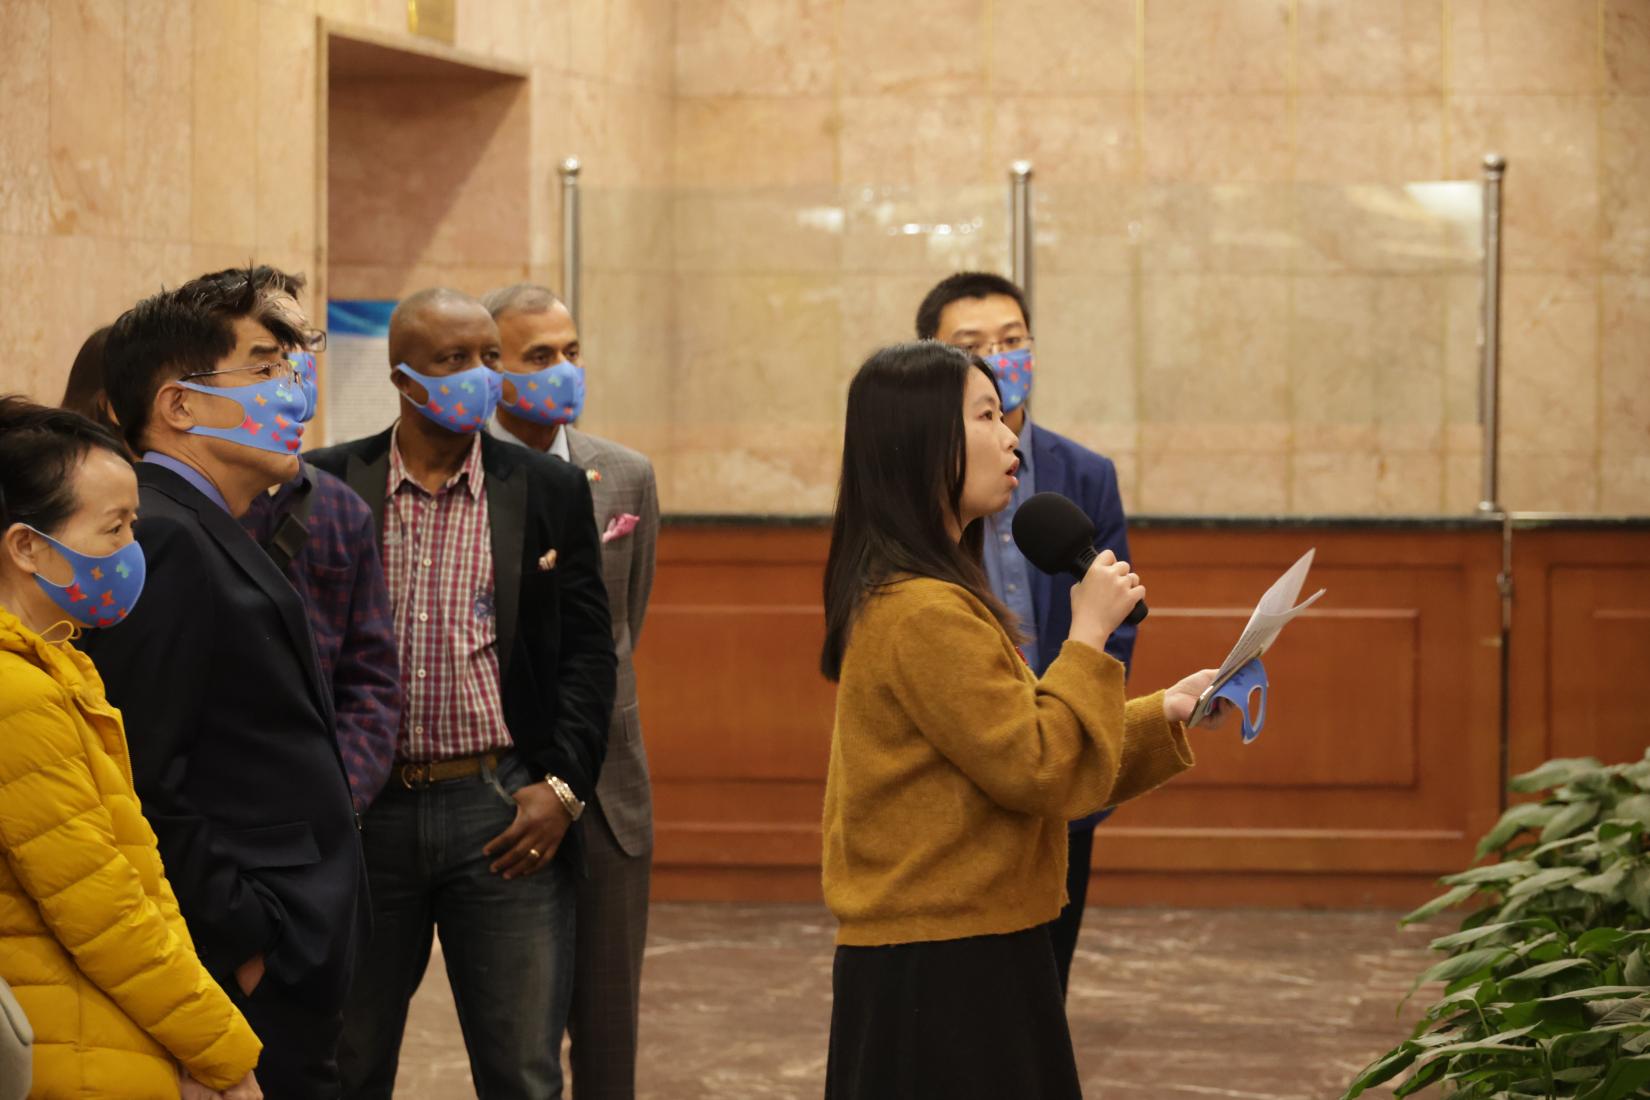 Weng Huiling (in front, holding a microphone) guides an exhibition tour on Zero Discrimination Day. ©UNV, 2022